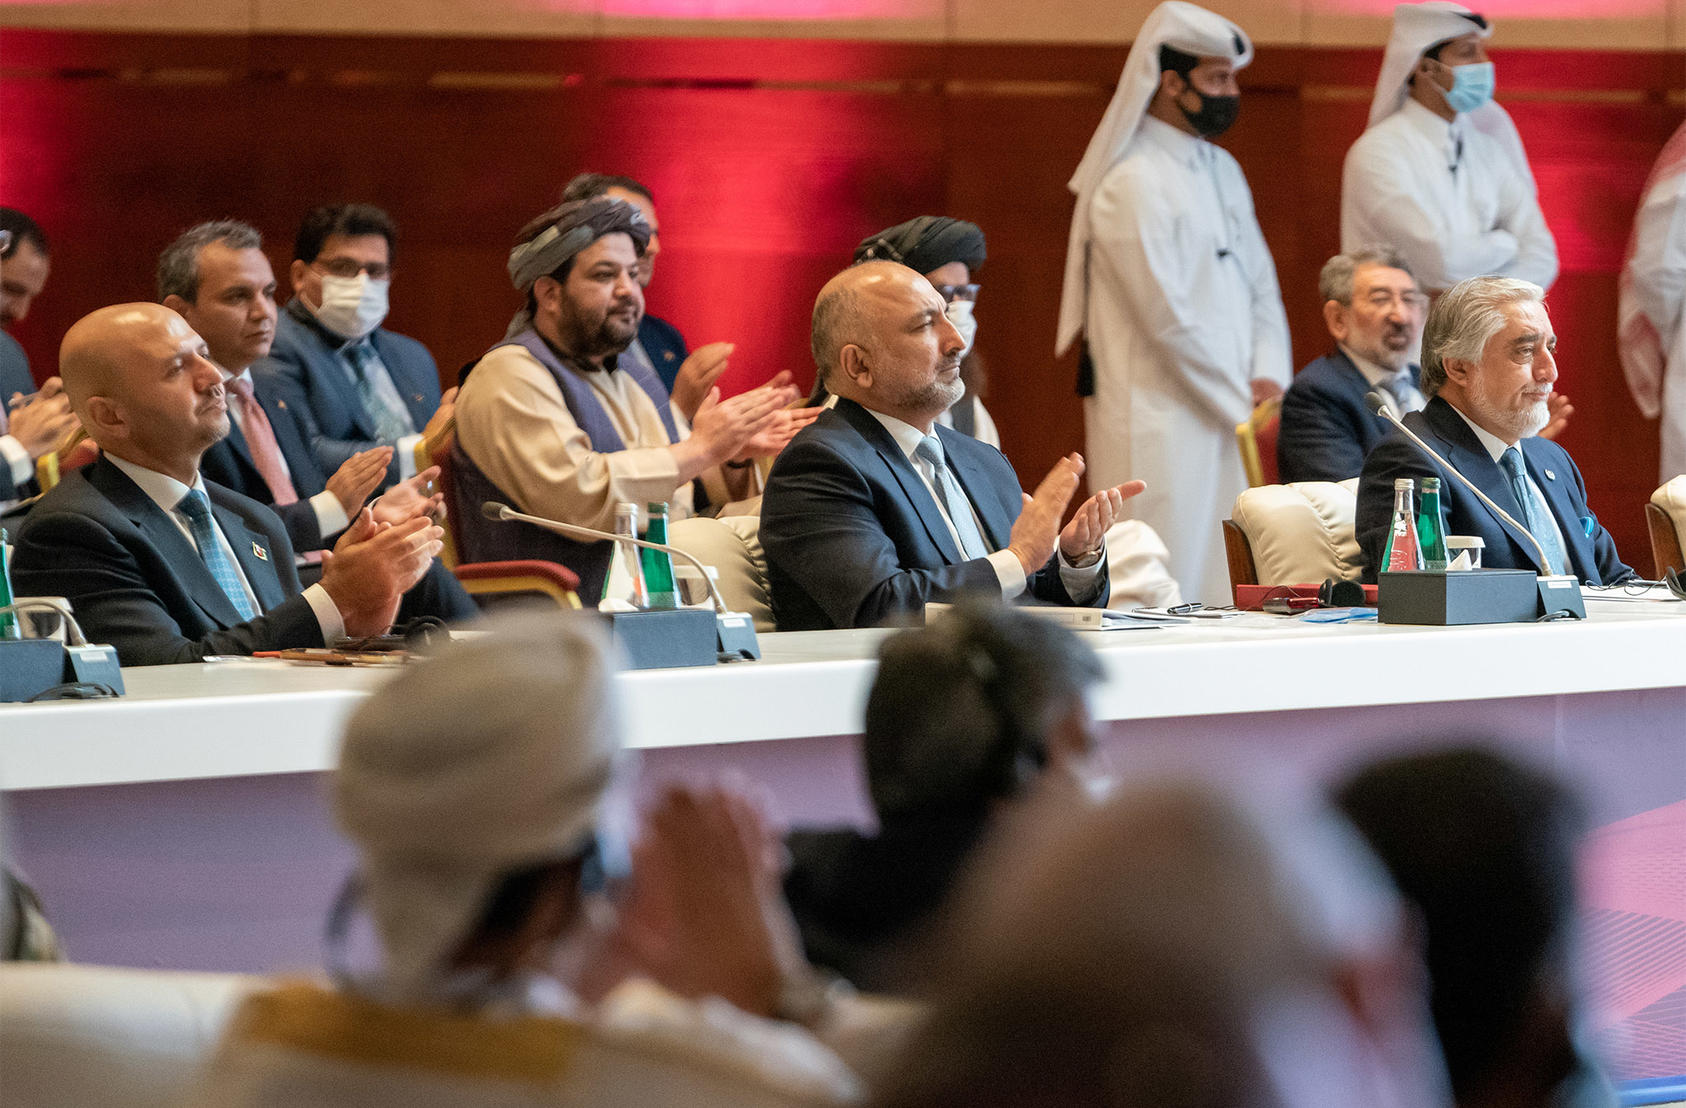 Members of the Afghan government delegation, including Abdullah Abdullah, the chairman of the High Council for National Reconciliation, during the opening of intra-Afghan negotiations in Doha, Qatar, Sept. 12, 2020. (Ron Przysucha /U.S. State Department)